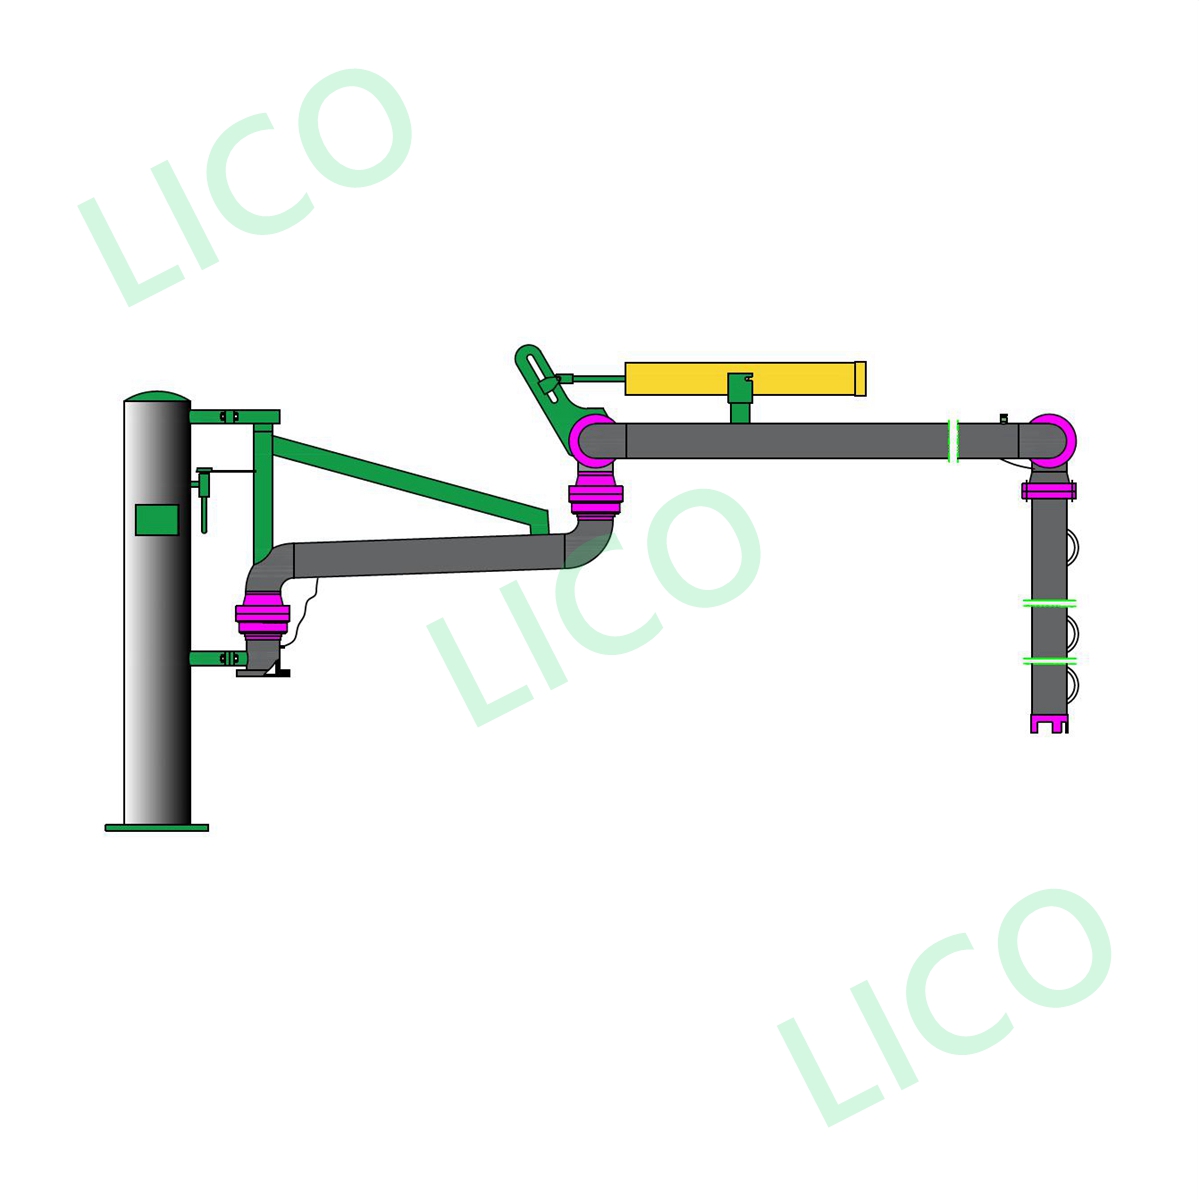 Gasoline Industrial Top Loading Arm for Rail Car